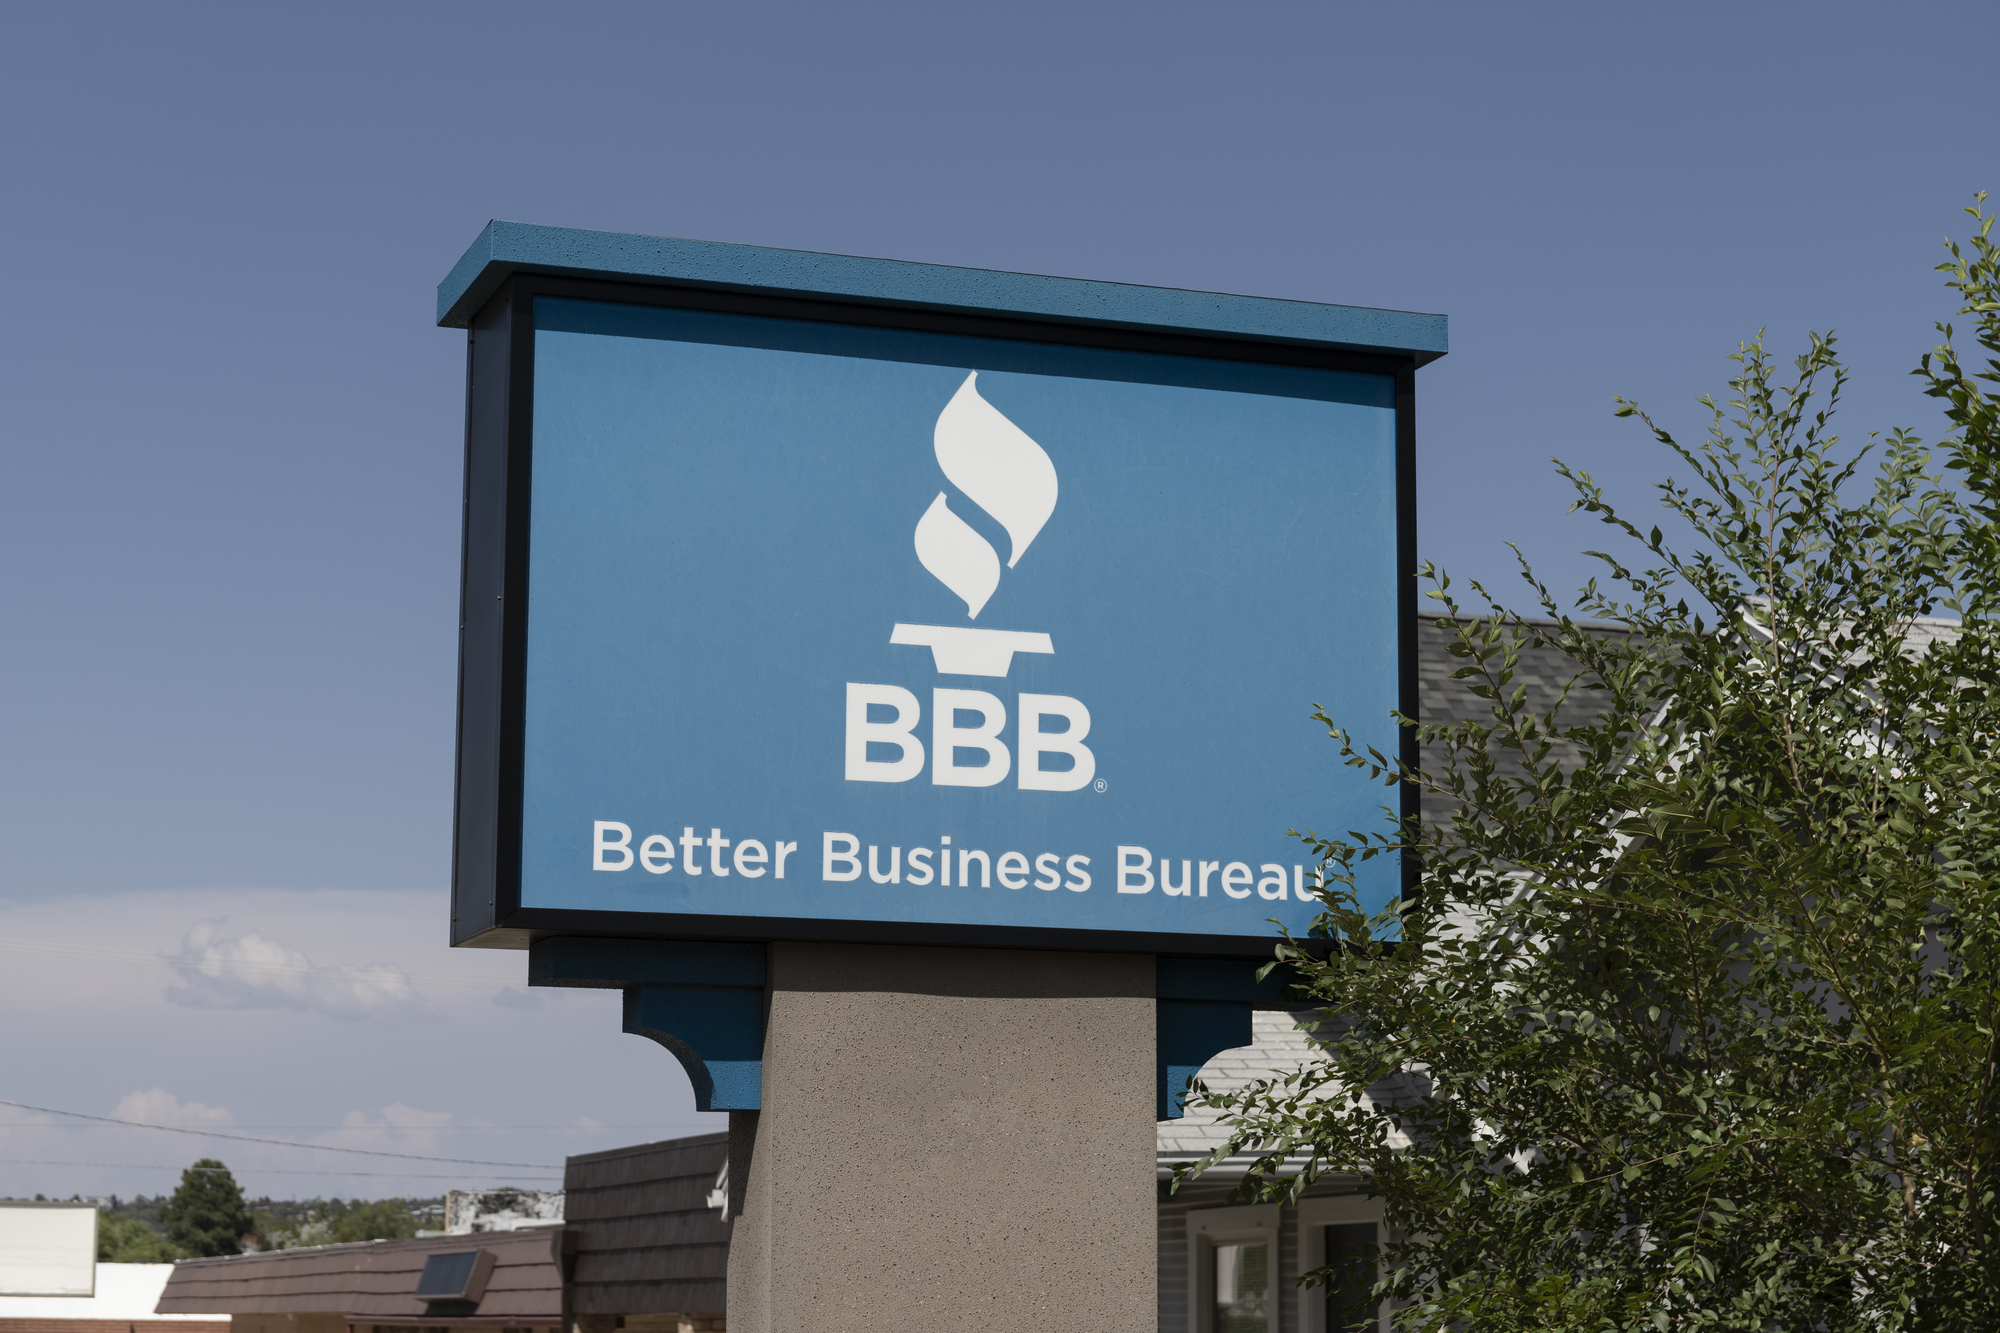 Prescott – Circa September 2021: Better Business Bureau local office. The Better Business Bureau is a nonprofit organization whose mission is to focus on advancing marketplace trust.